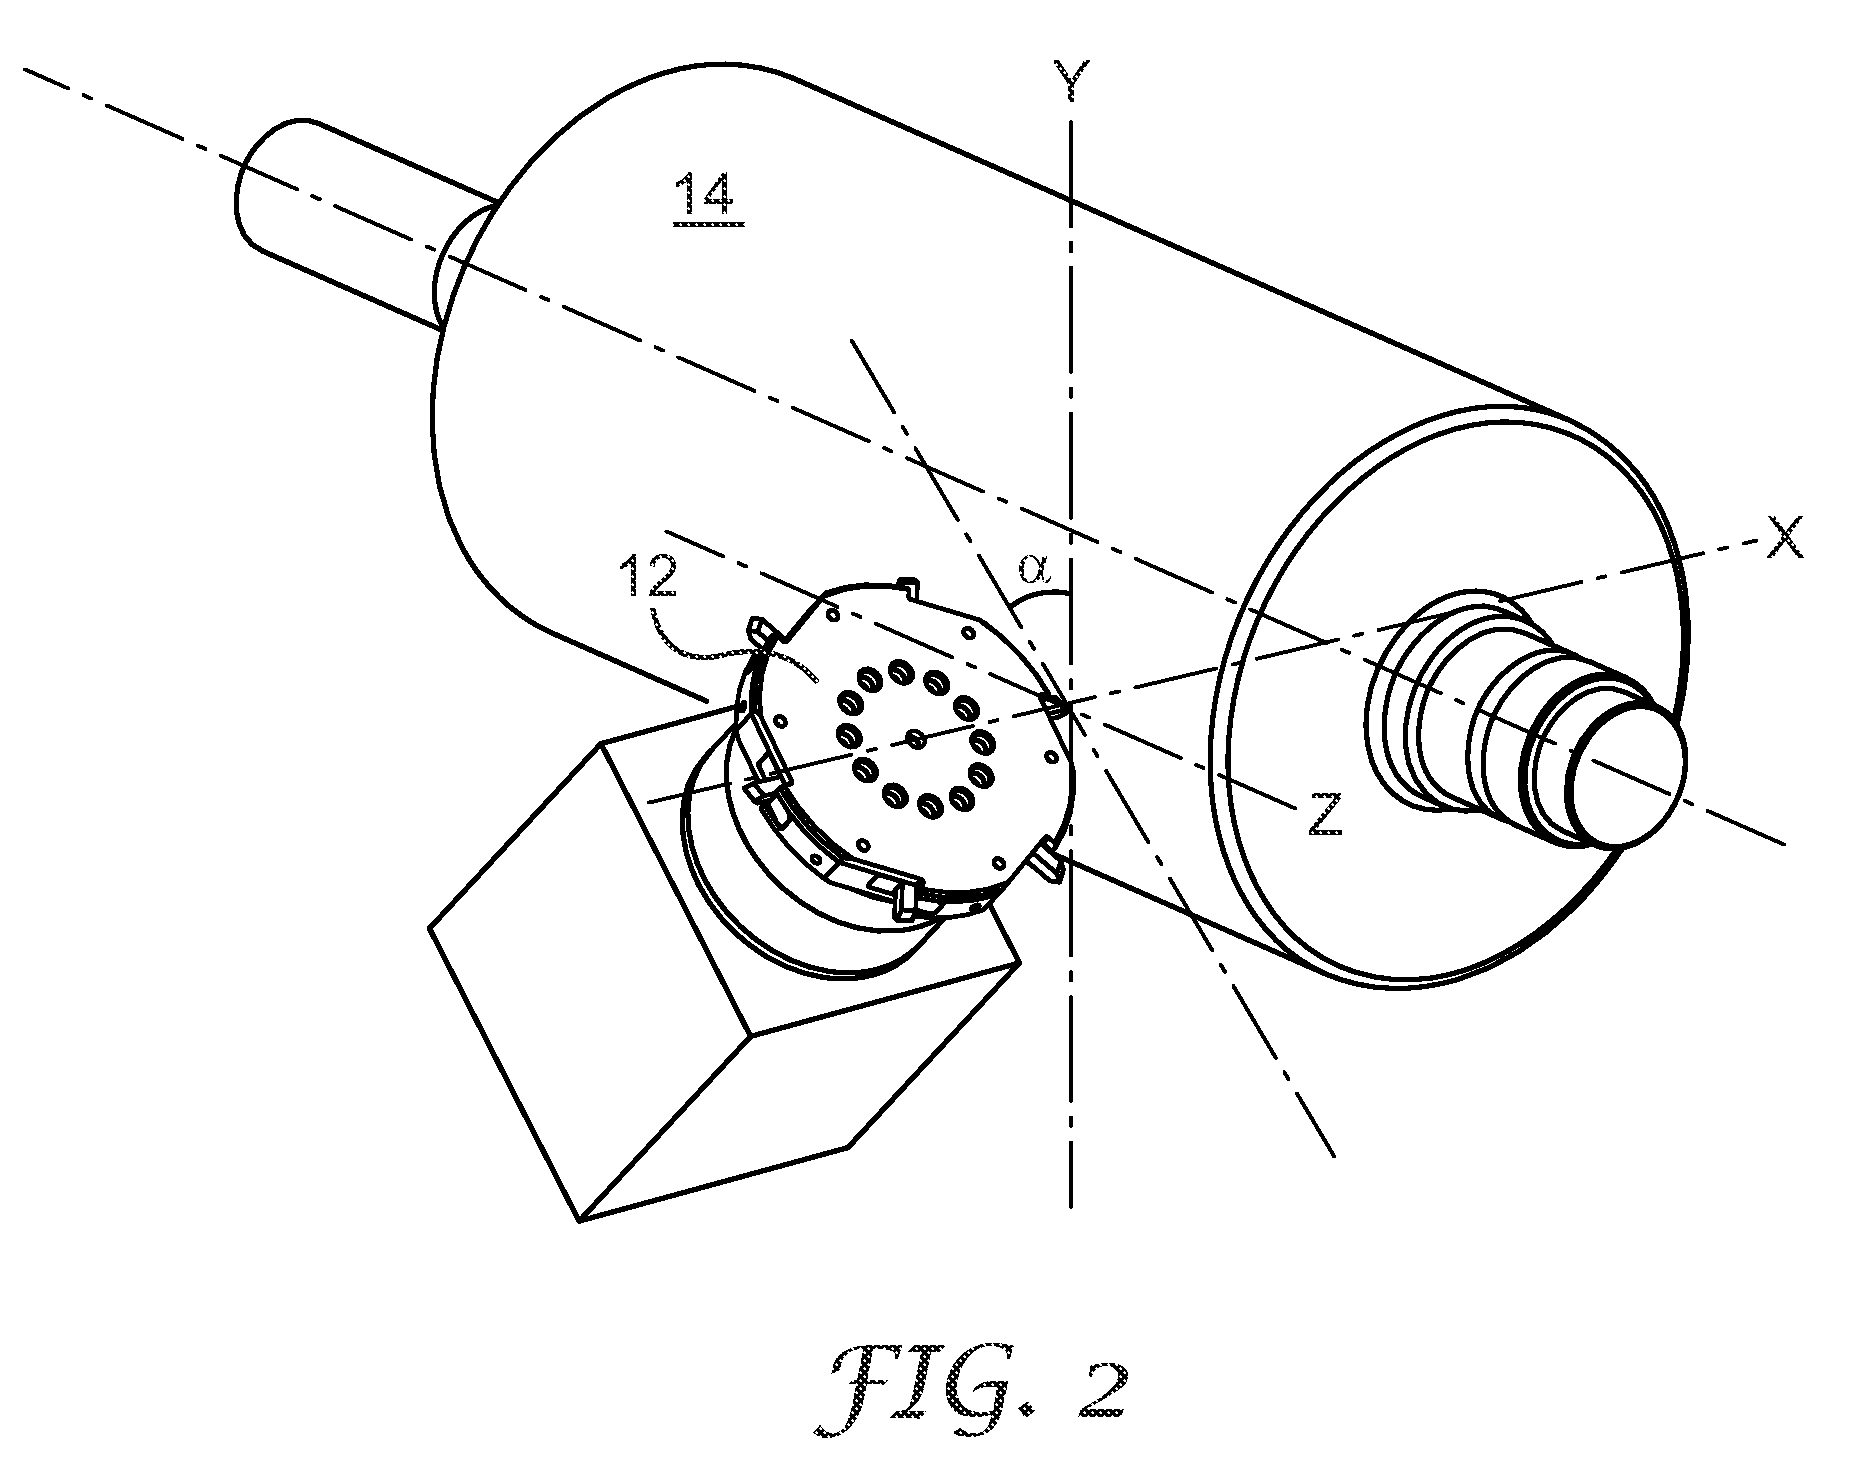 Fly-cutting head, system and method, and tooling and sheeting produced therewith